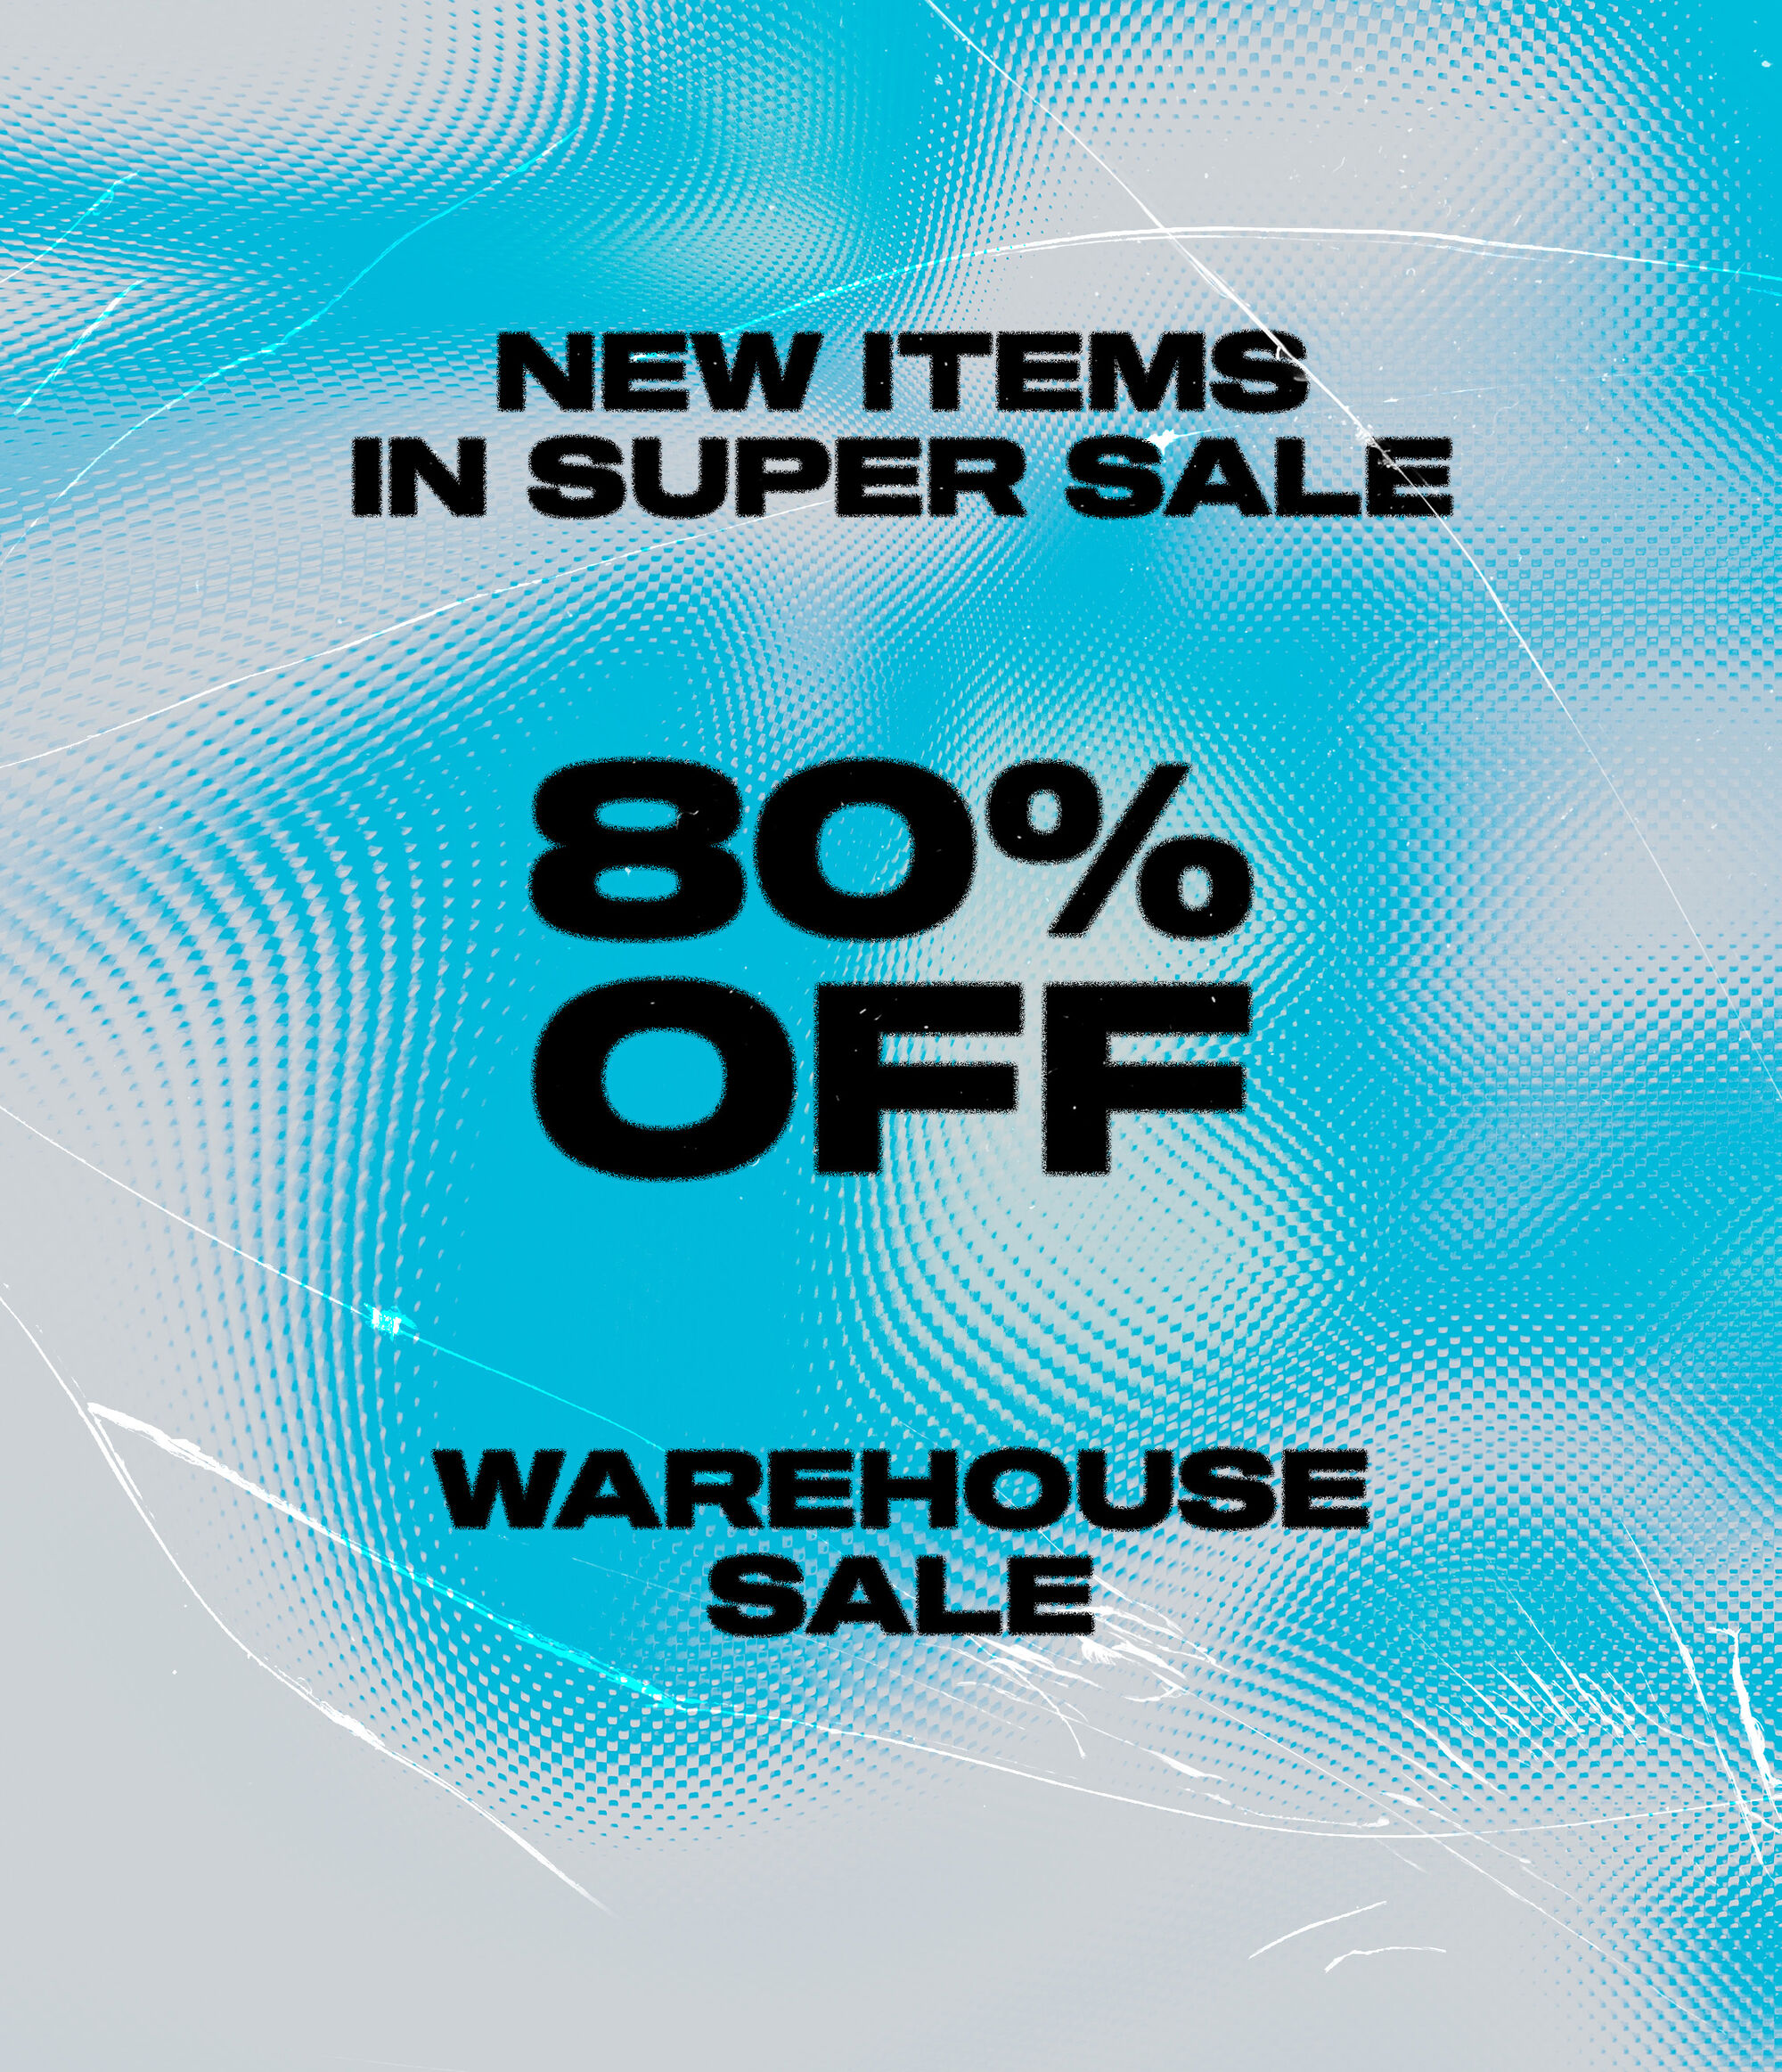 NEW ITEMS IN SUPER SALE WAREHOUSE SALE 